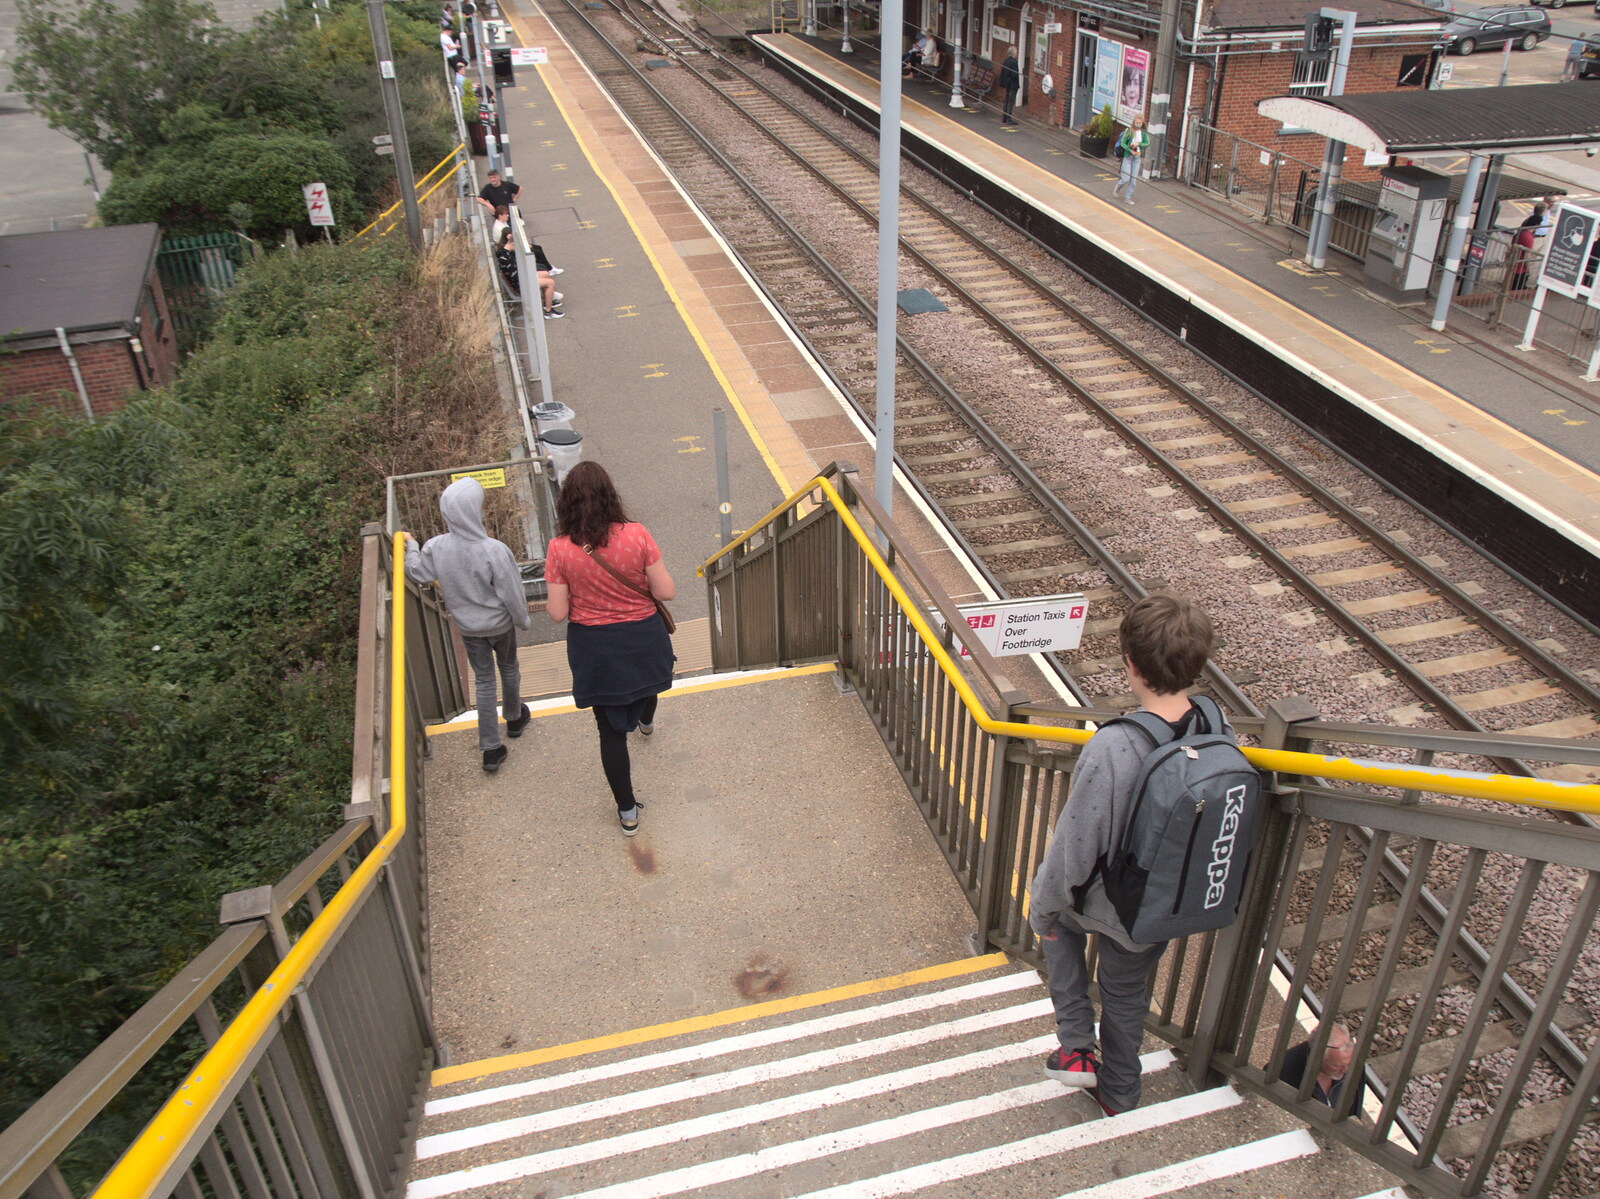 We cross the bridge to platform 2 from Head Out Not Home: A Music Day, Norwich, Norfolk - 22nd August 2021